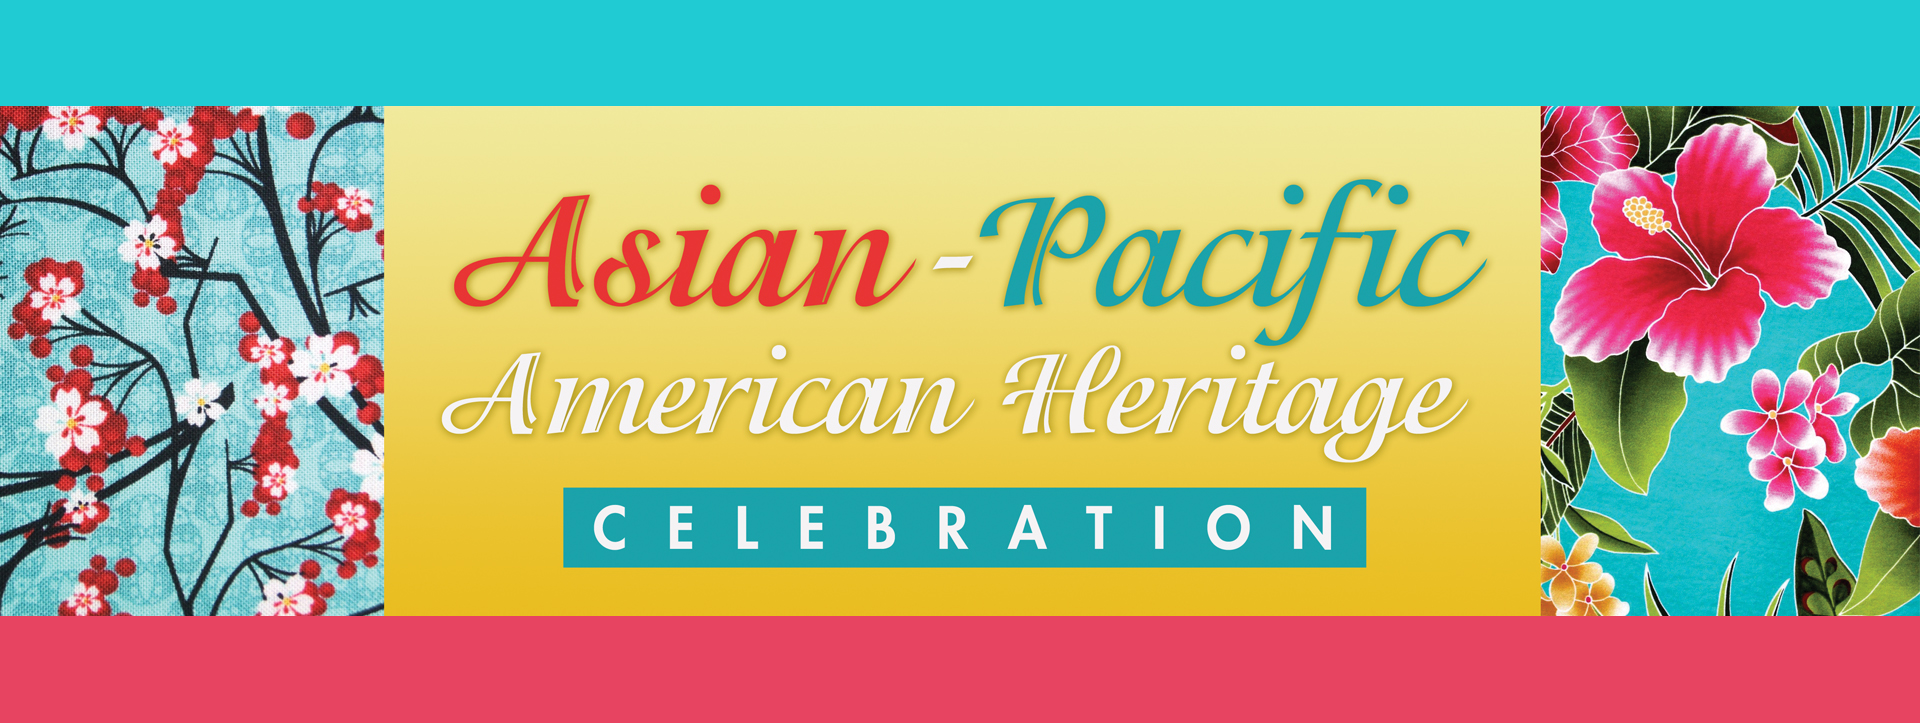 Asian-Pacific American Heritage Celebration